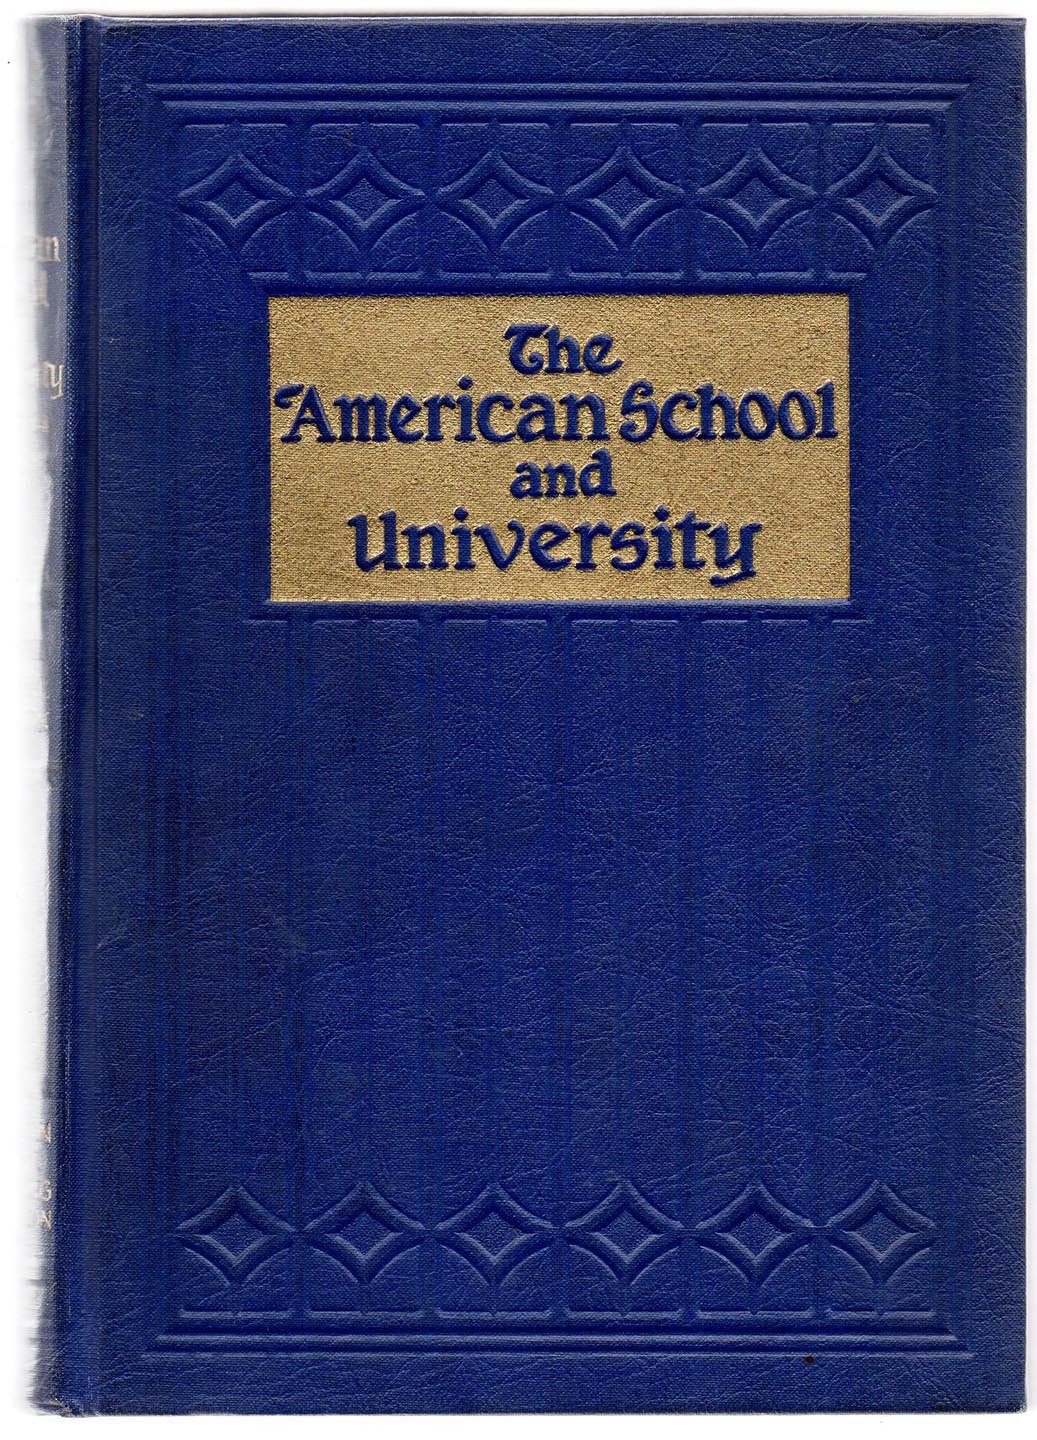 The American School and University: A Yearbook devoted to the Design, Construction, Equipment, Utilization, and Maintenance of Educational Buildings and Grounds 1933-1934